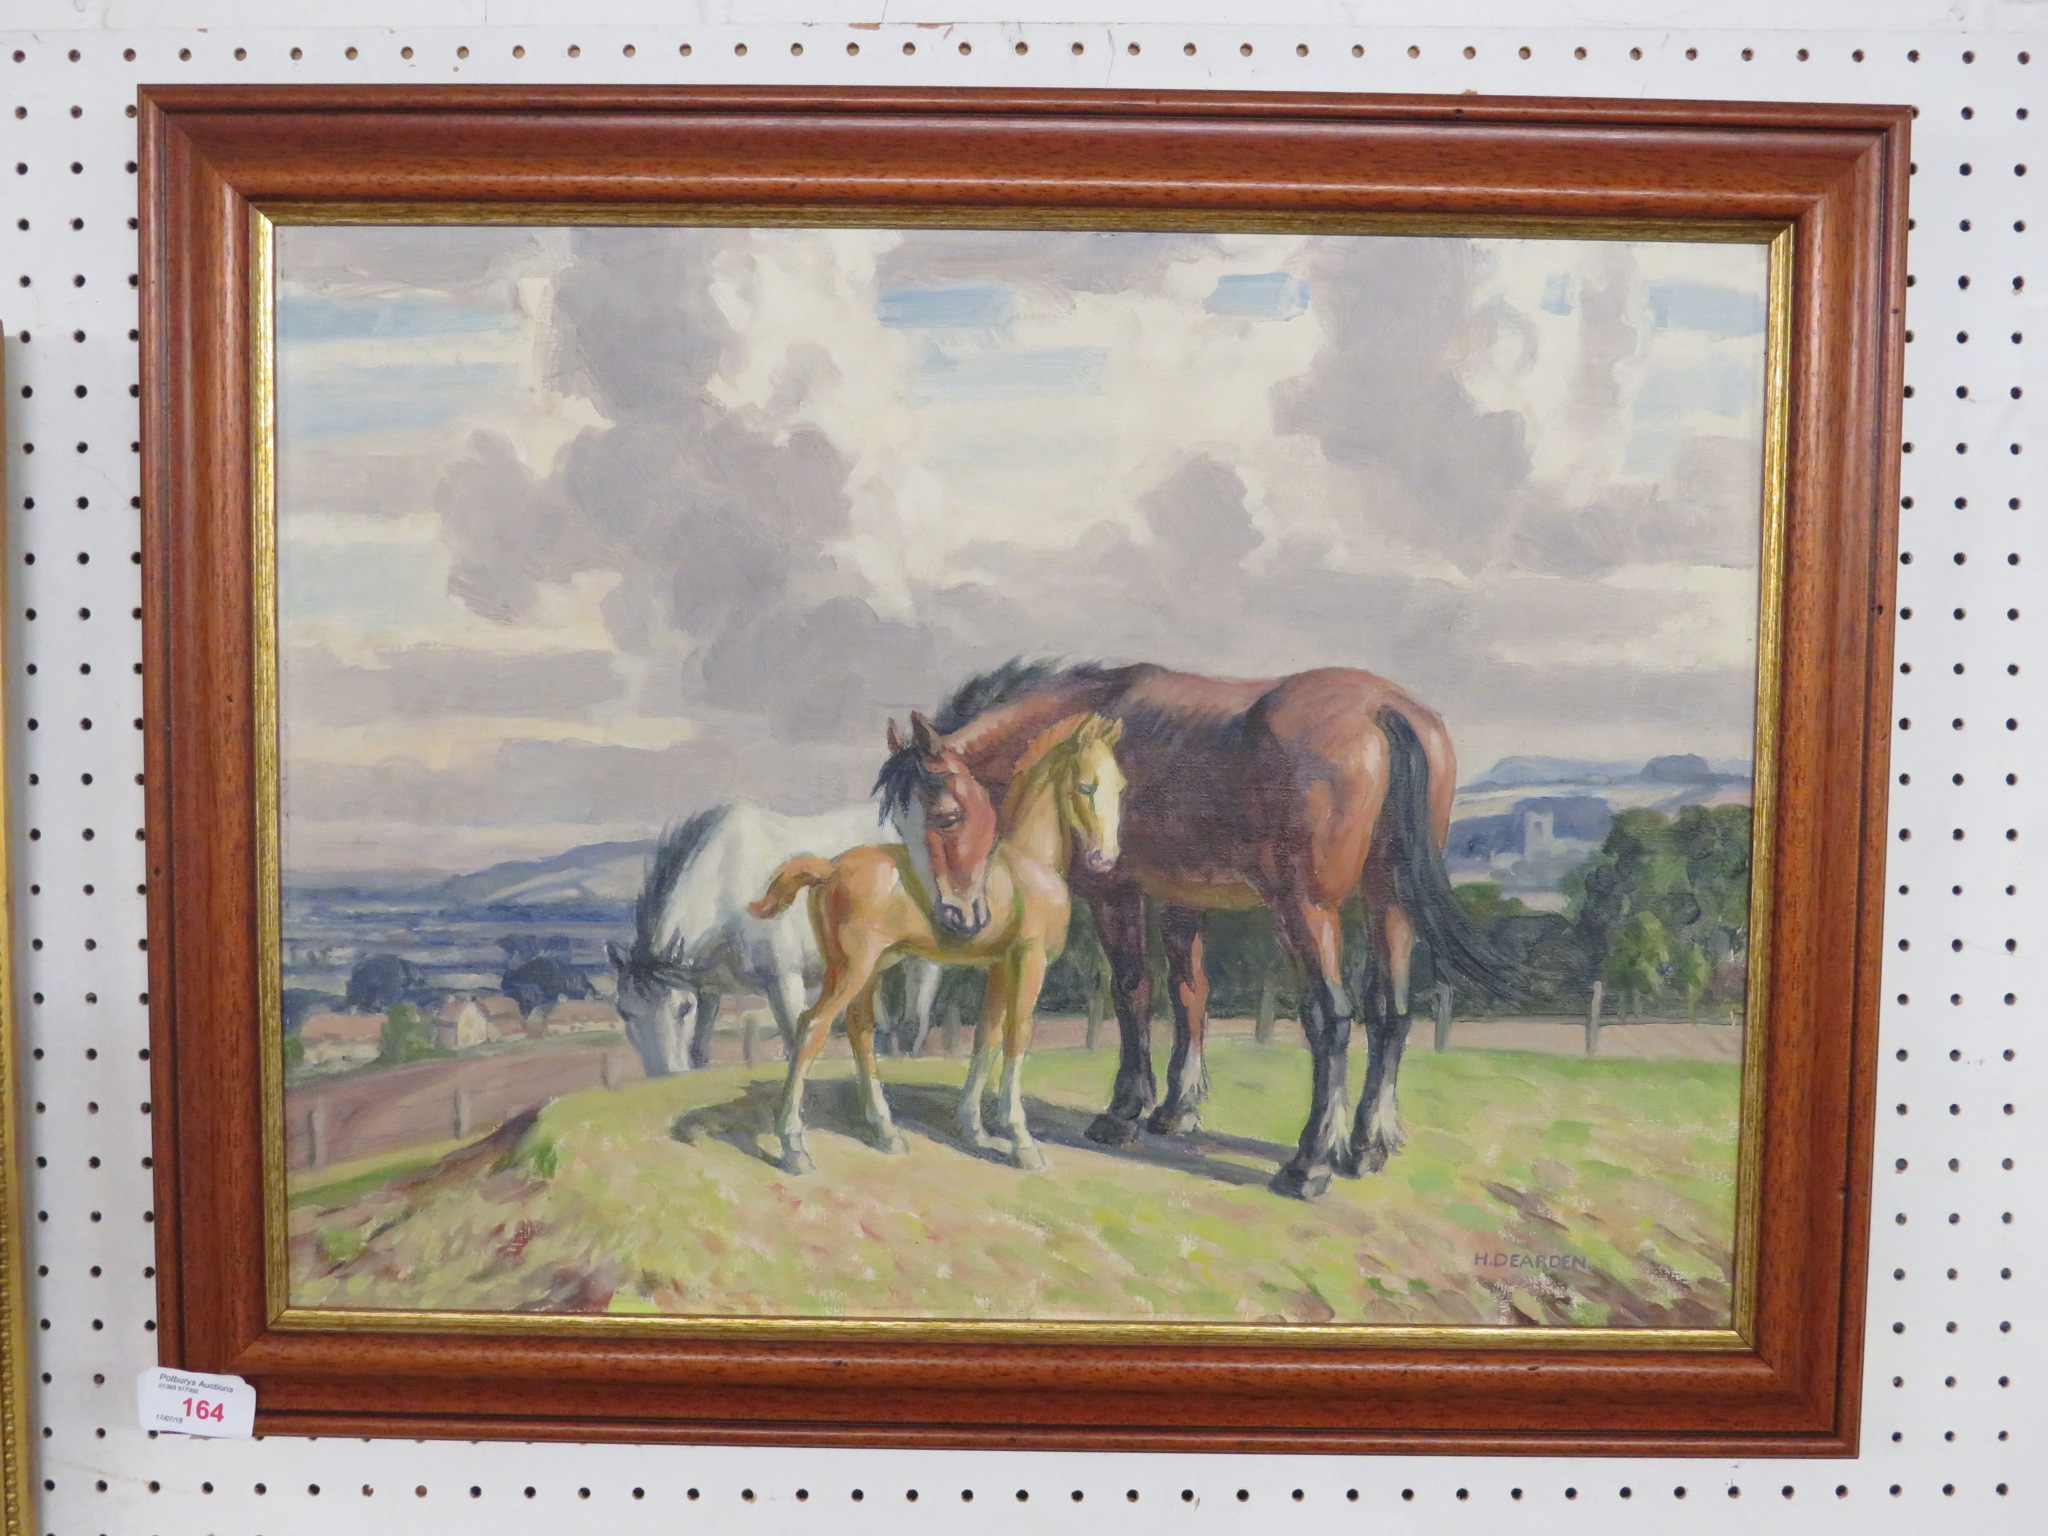 Harold Dearden (1888-1962) - two horses and foal on hill top with town beyond, oil on canvas, signed - Image 2 of 3